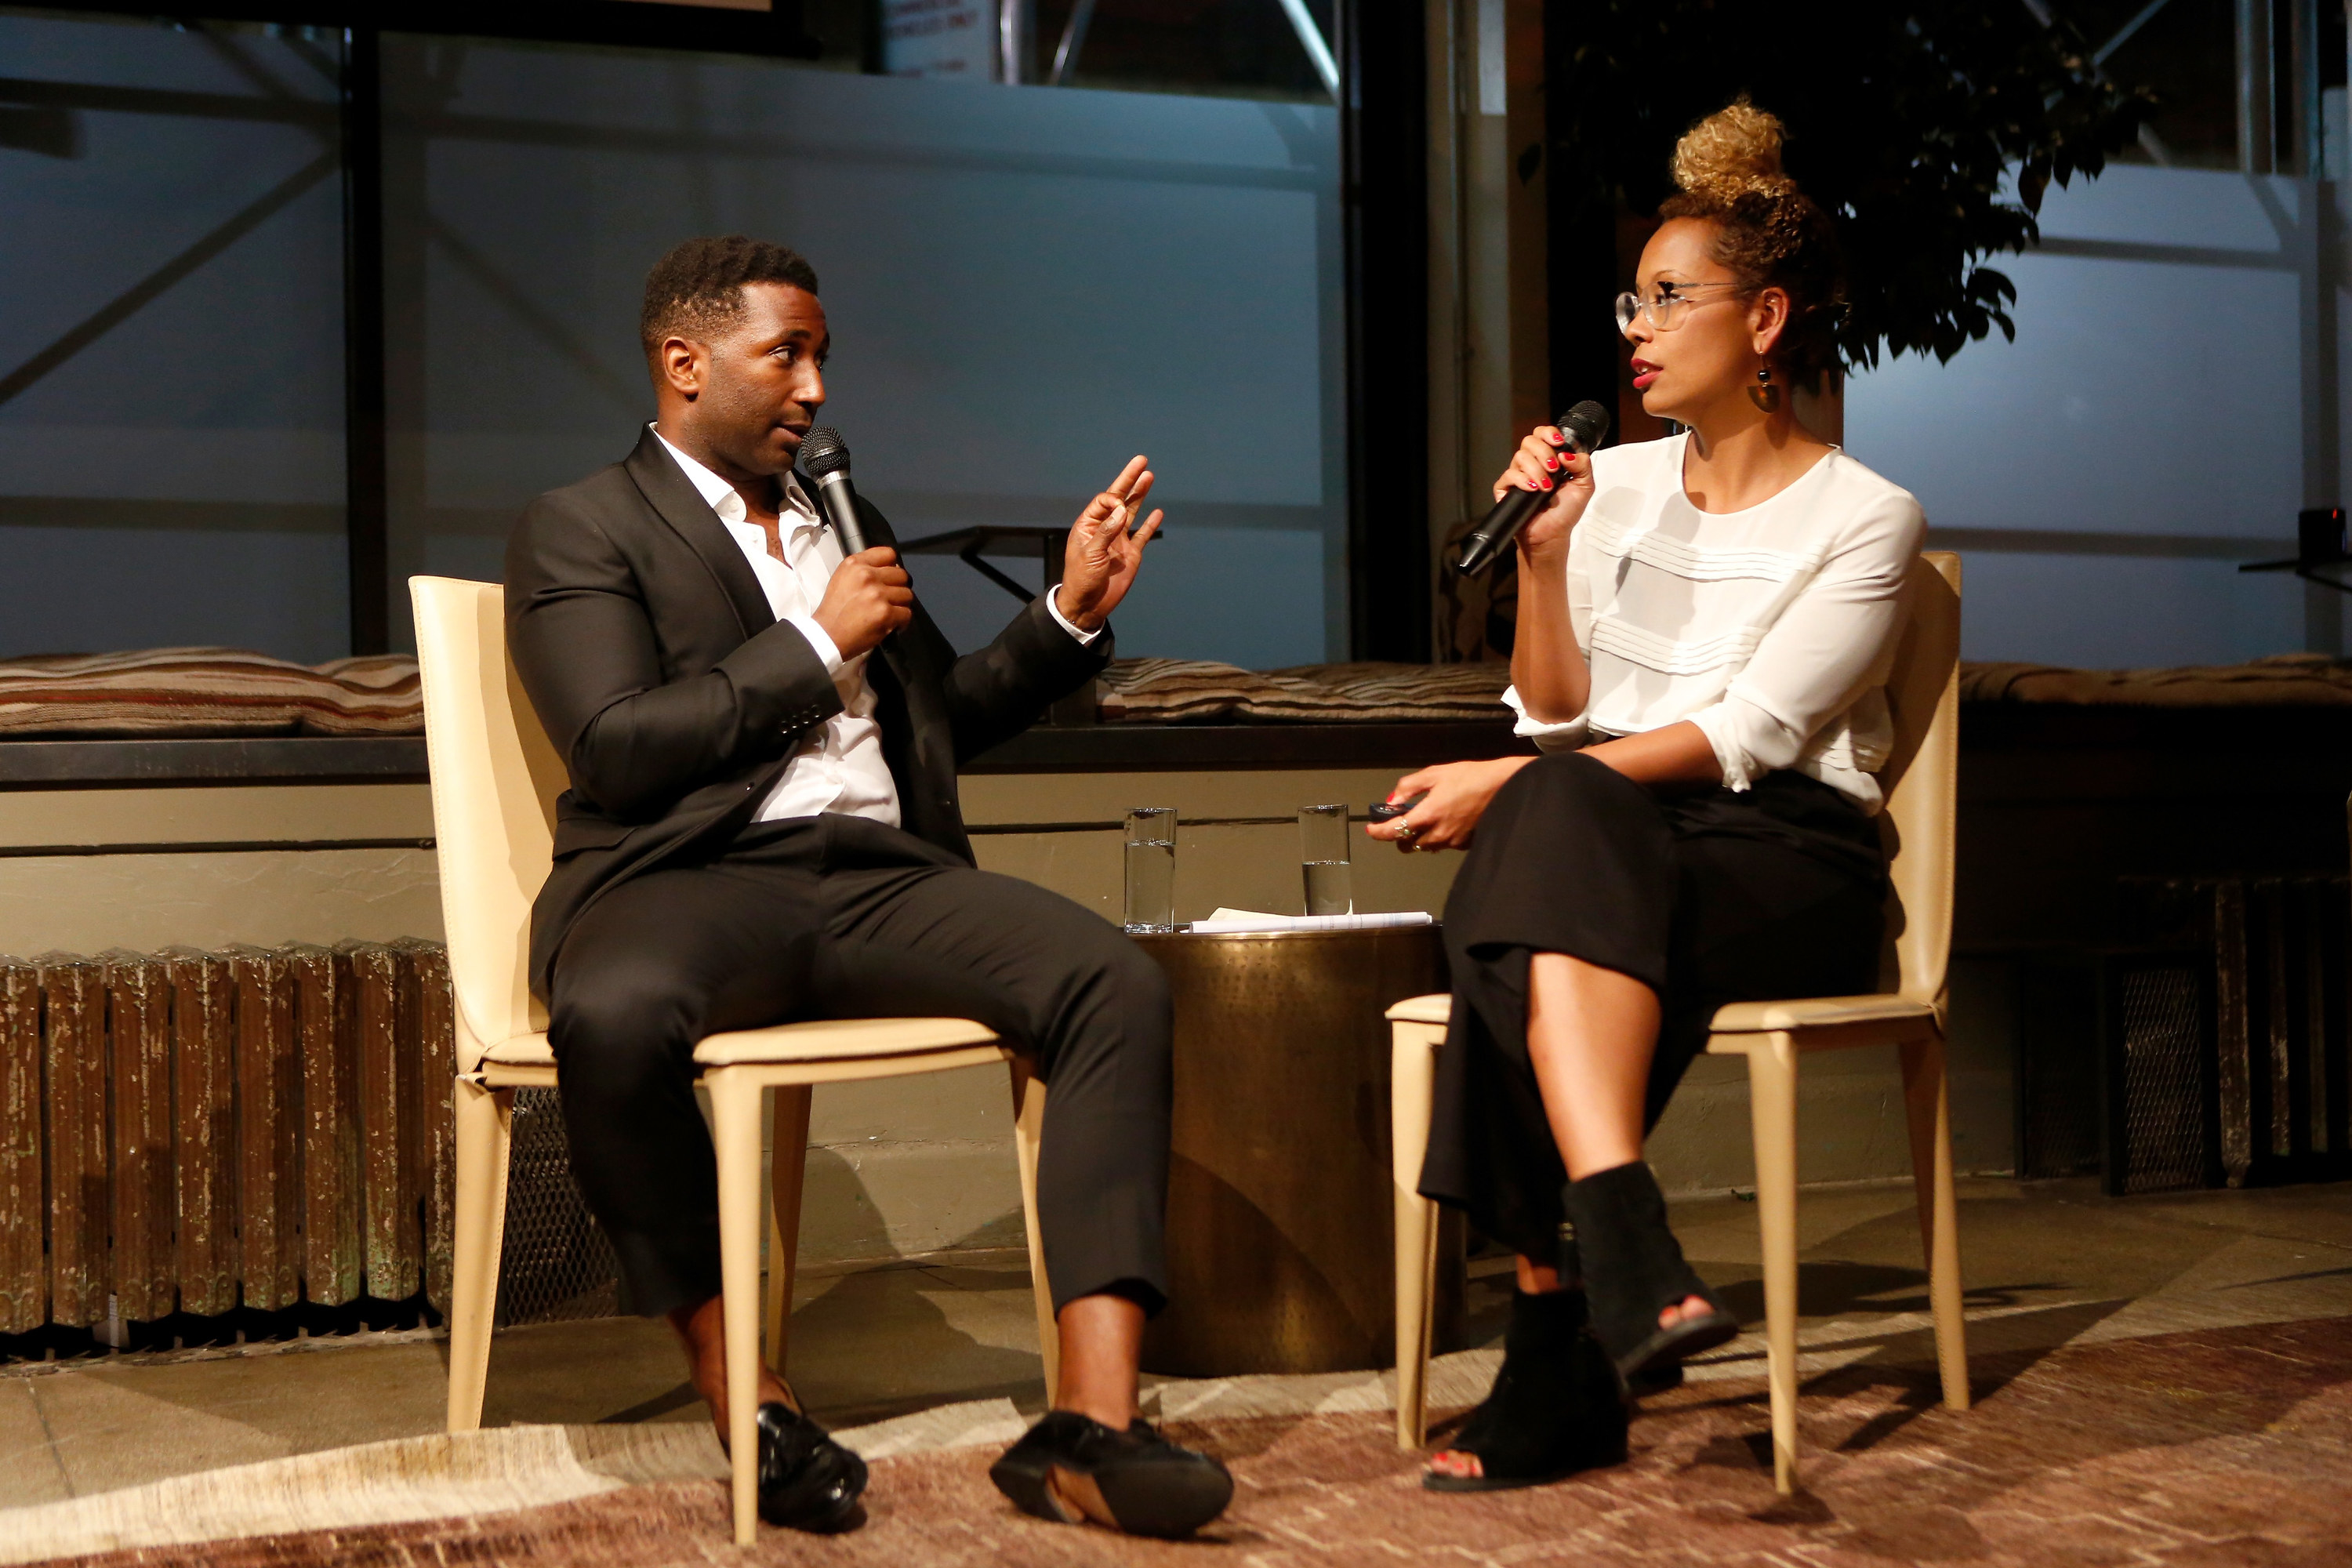 Wesley Morris and Jenna Wortham having a live discussion